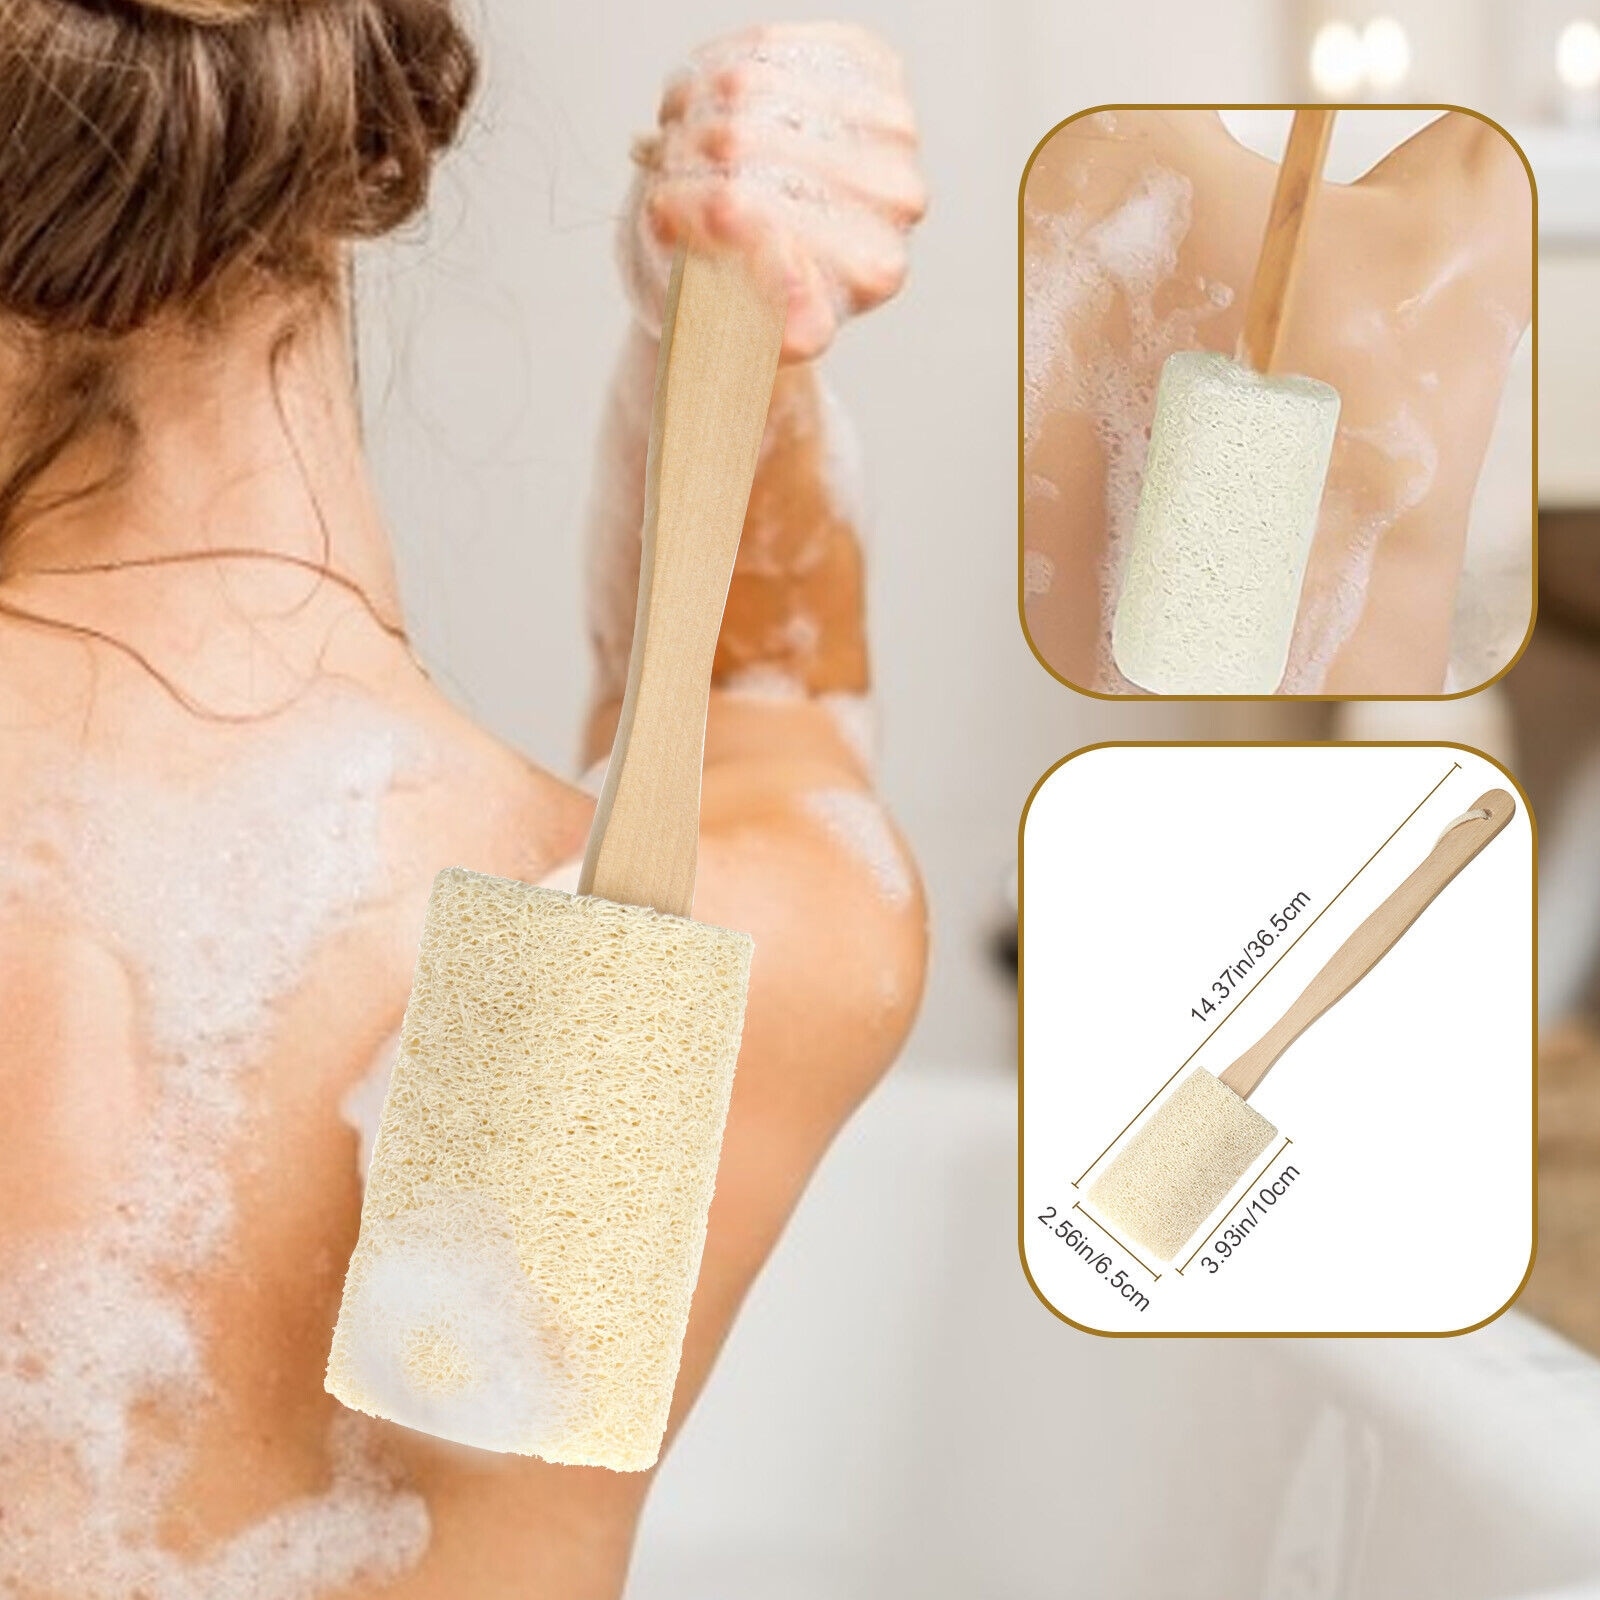 https://ak1.ostkcdn.com/images/products/is/images/direct/d853f2bc5e20a4c723573596d7a3435c39555395/Wooden-Handle-Exfoliating-Loofah-Back-Massager-Scrubber.jpg